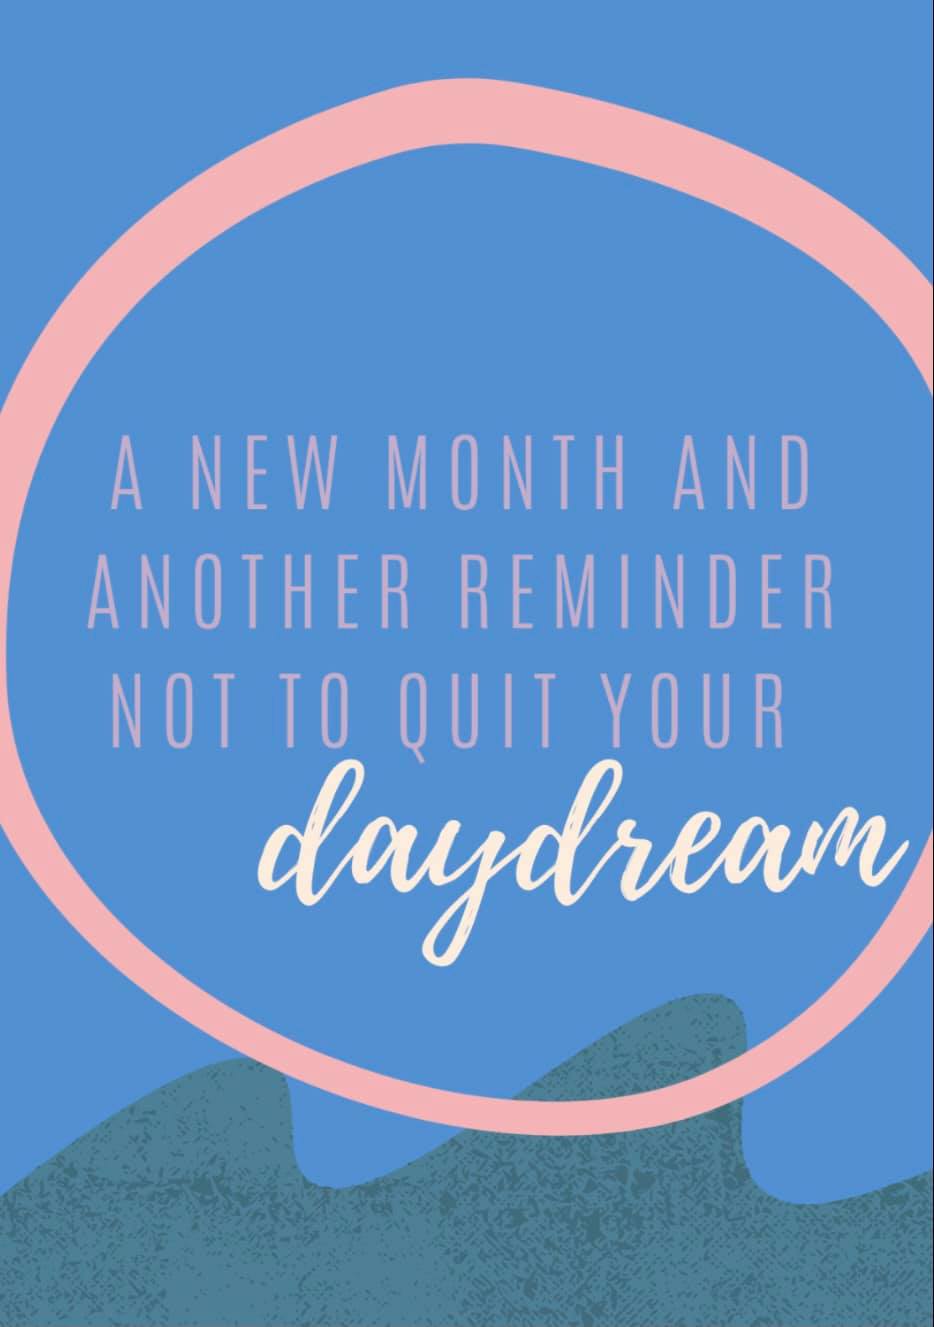 A new month and another reminder not to quit your daydream